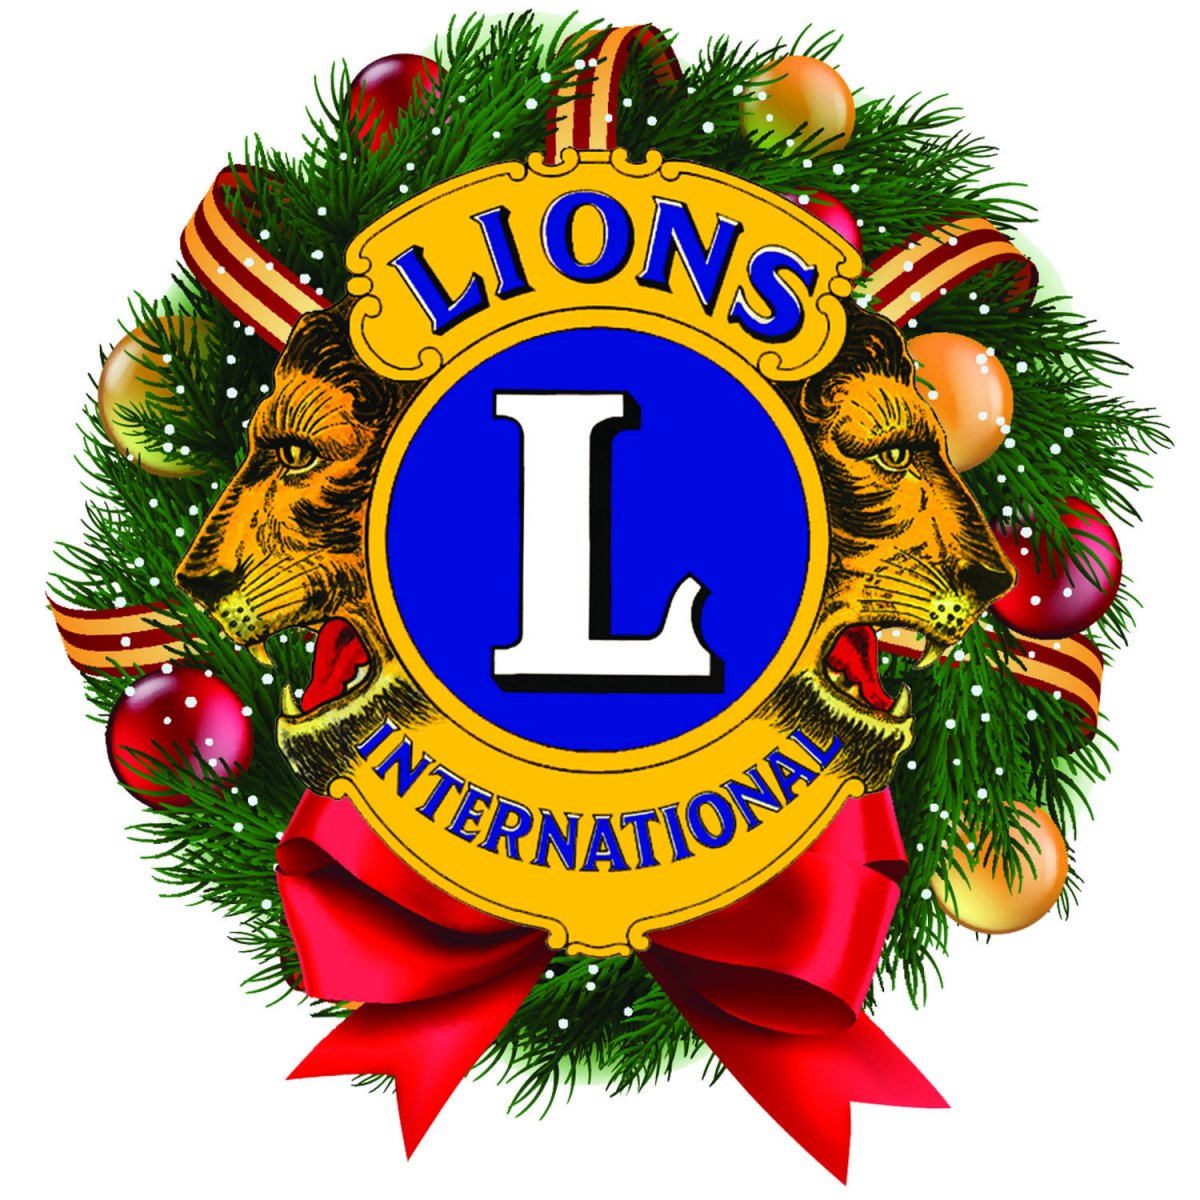 Sulphur Springs Lions Club Lighted Christmas Parade presented by Carriage House Manor Planned for December 7th